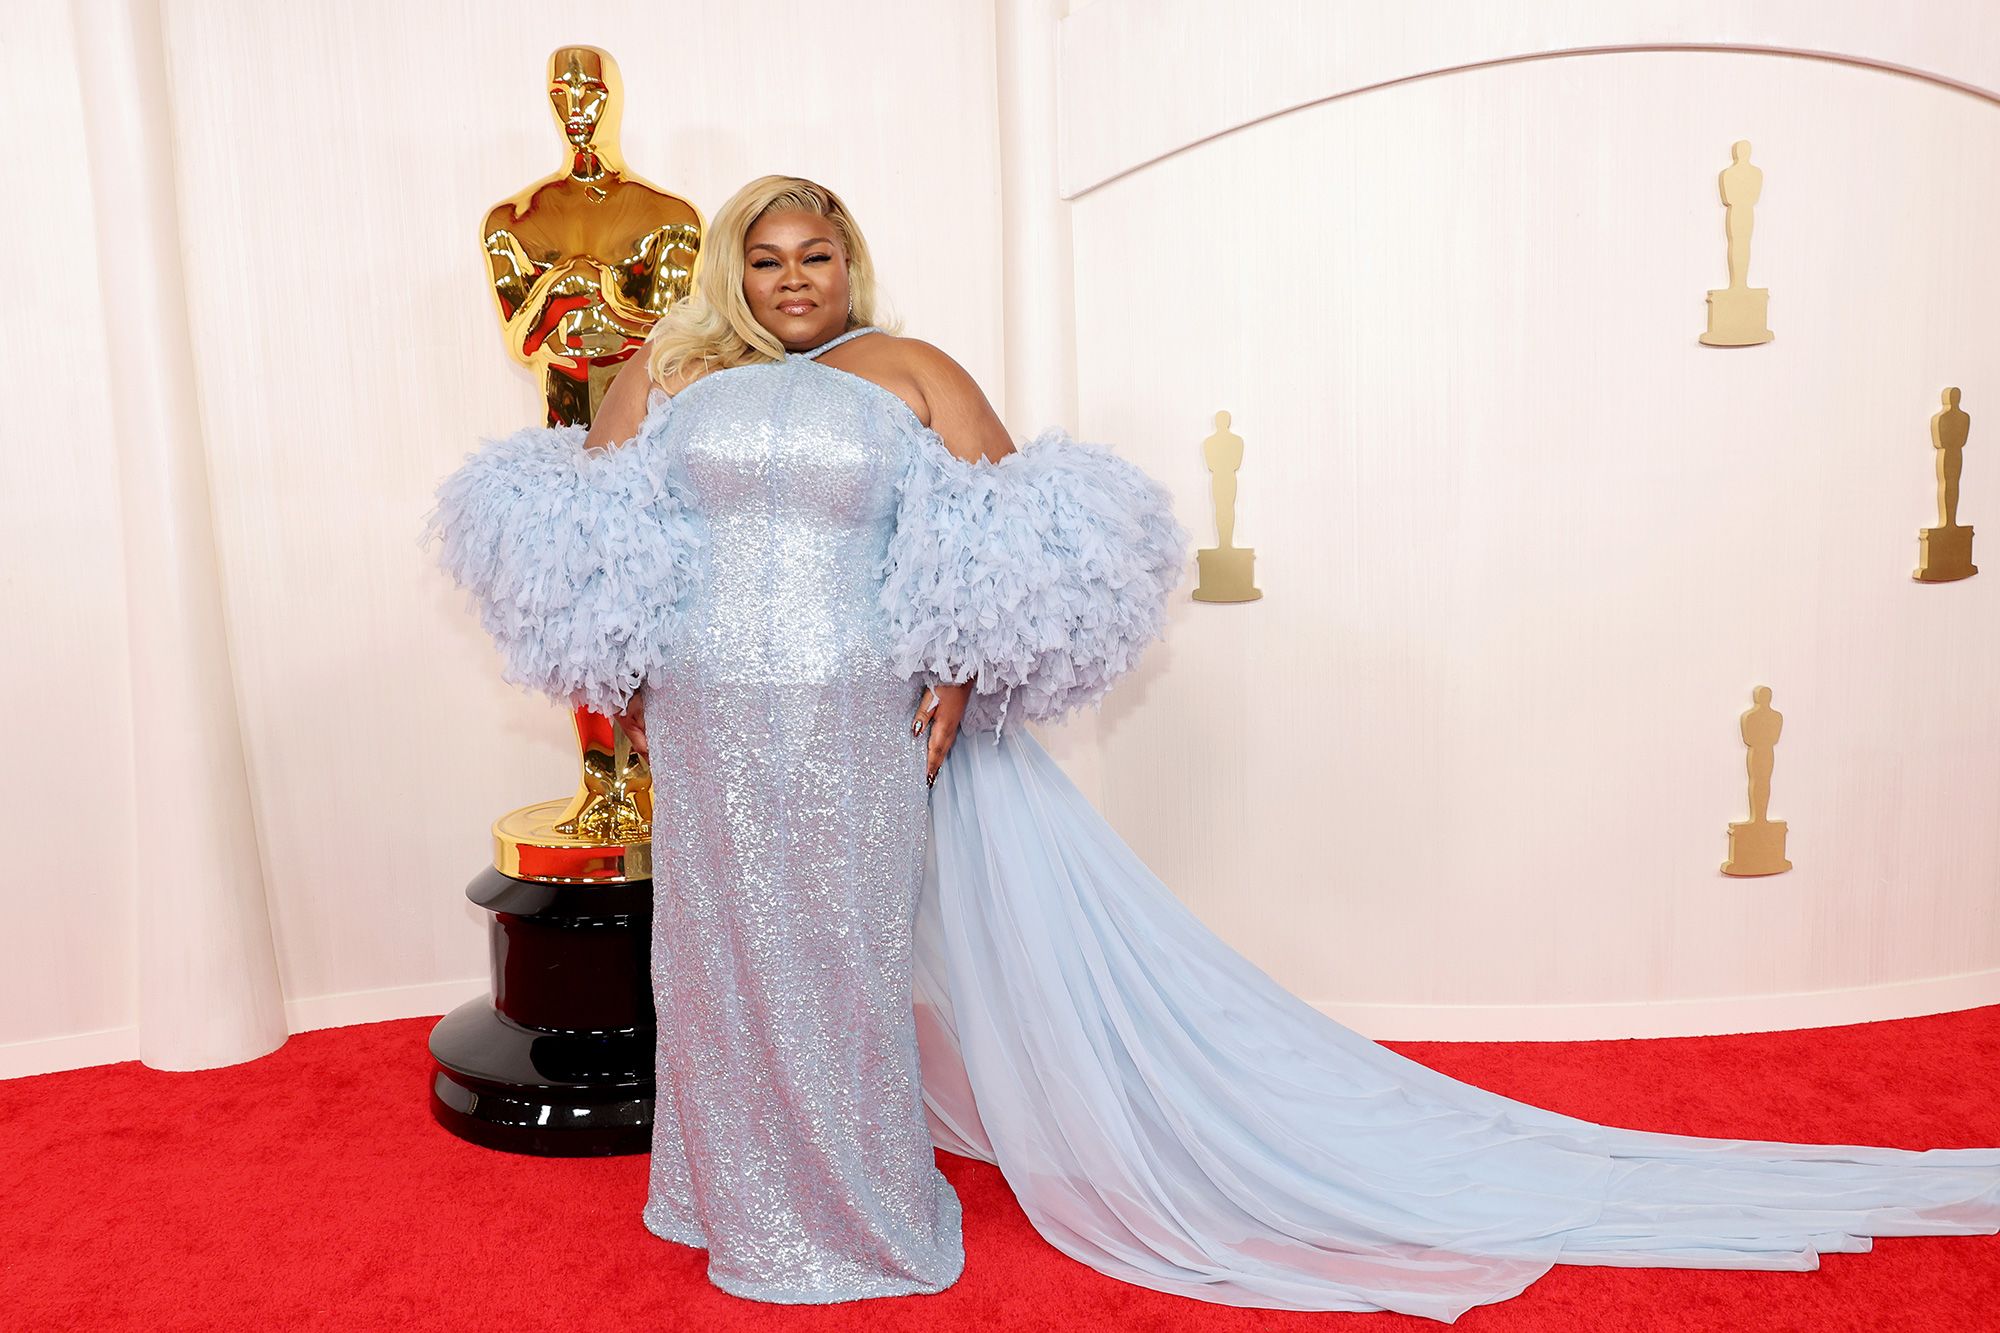 Daphne Joy Randolph, who won the Academy Award for Best Supporting Actress, wore a custom Louis Vuitton gown with hand-embroidered tulle and oversized sleeves.